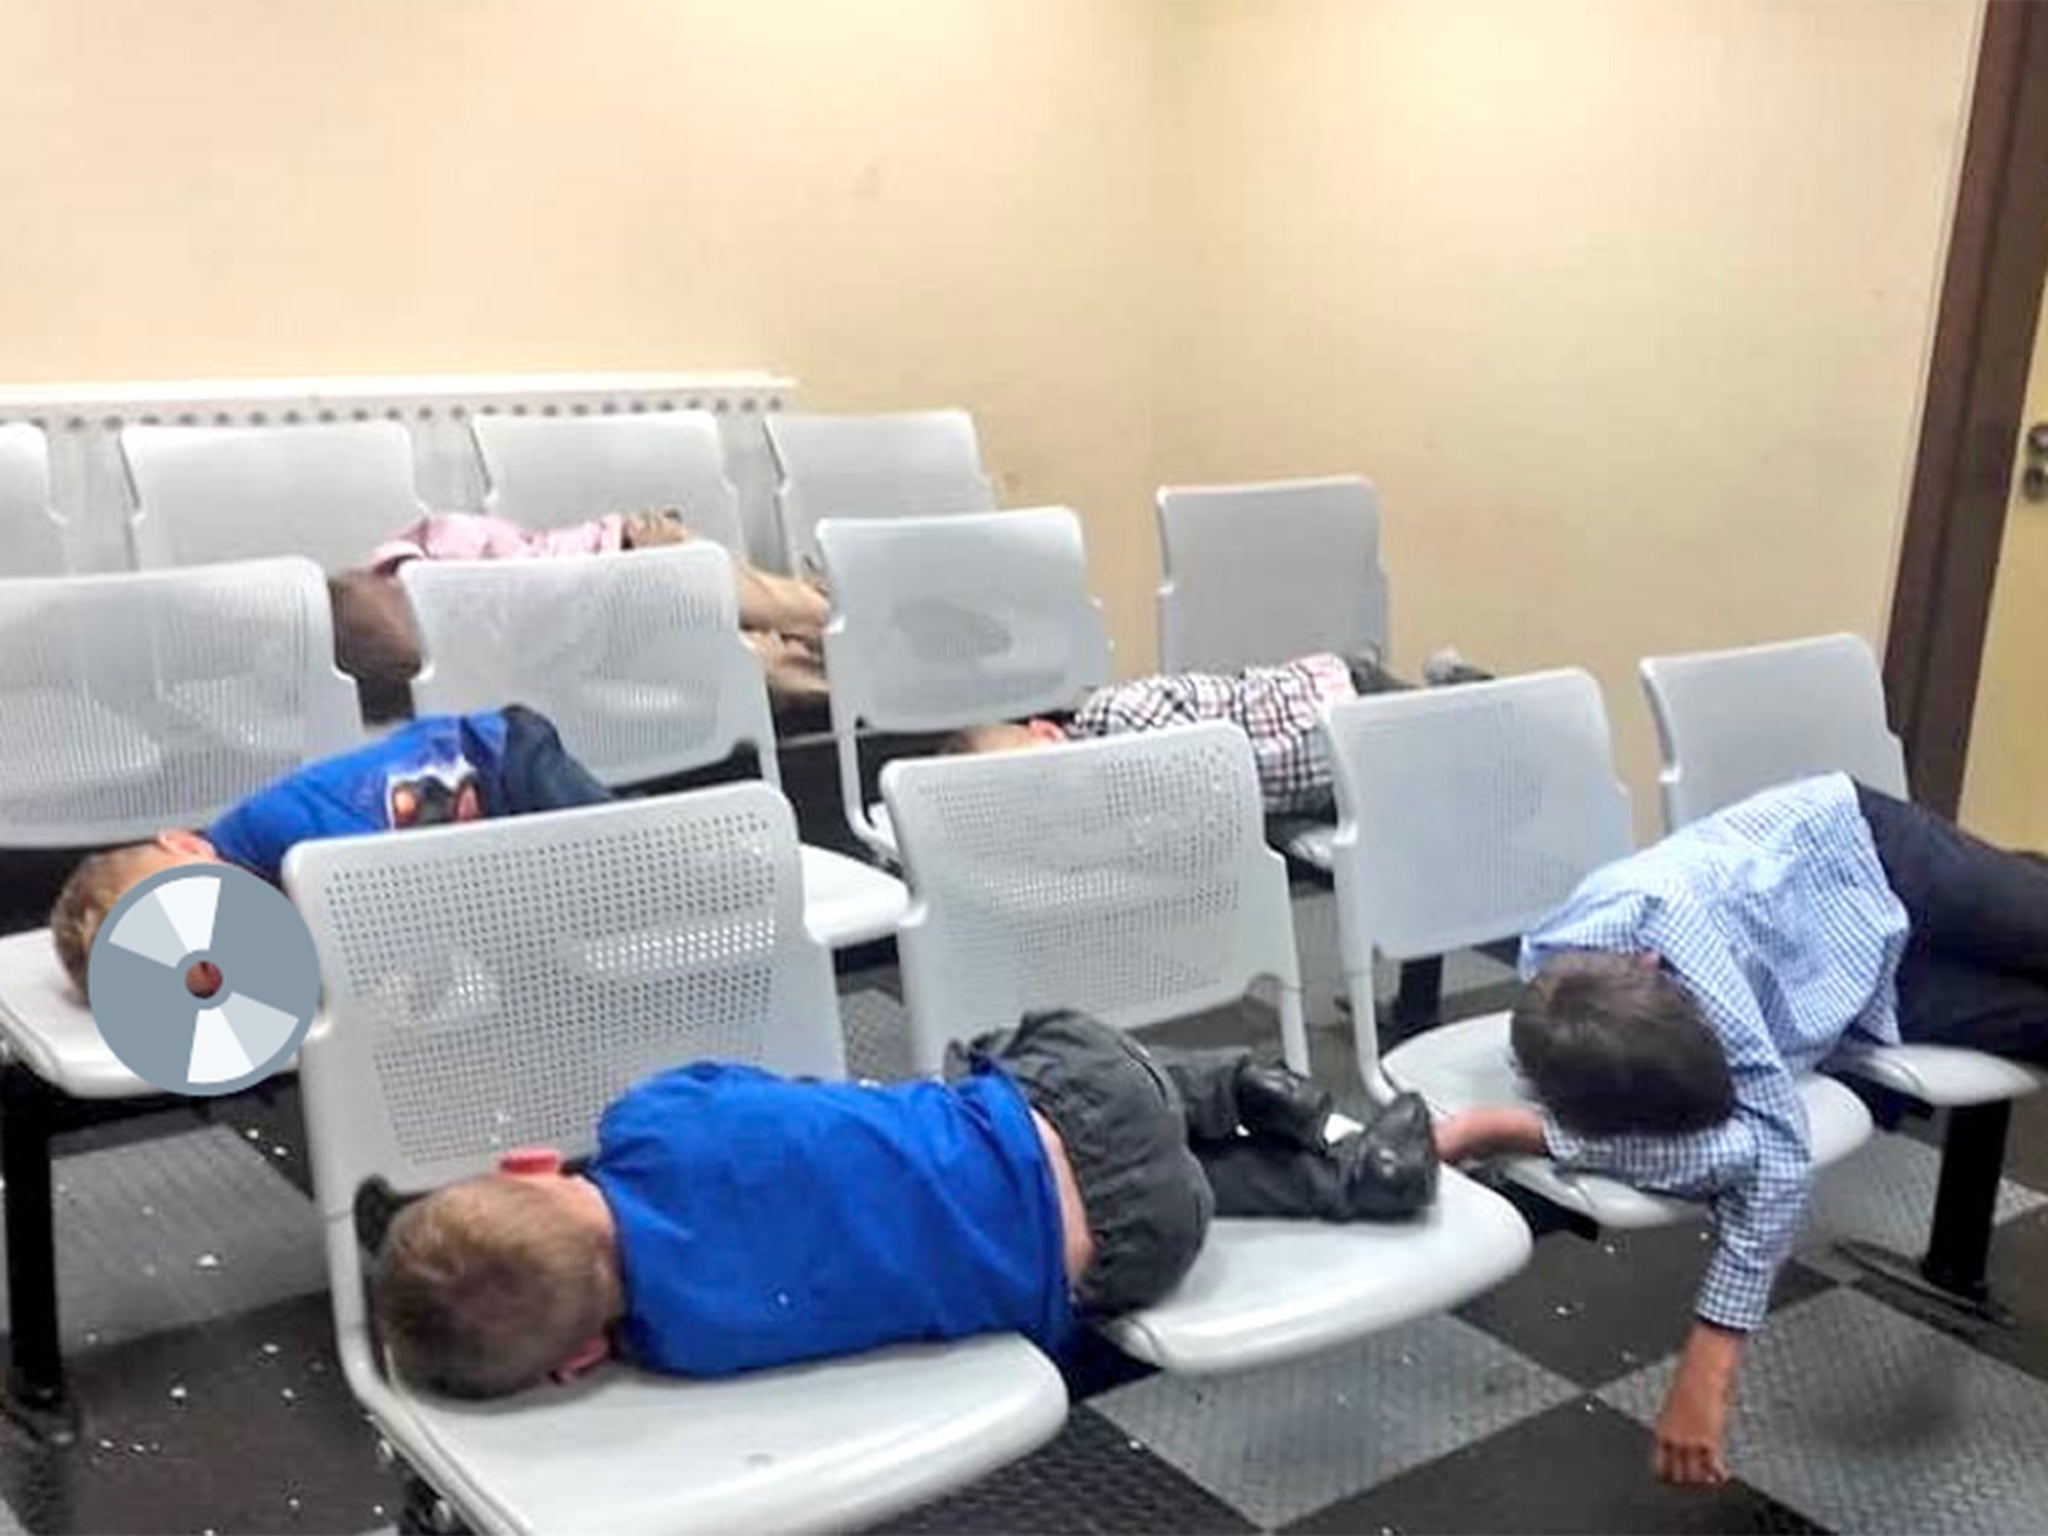 The photo of the children sleeping at Tallaght Garda Station has been widely shared online.